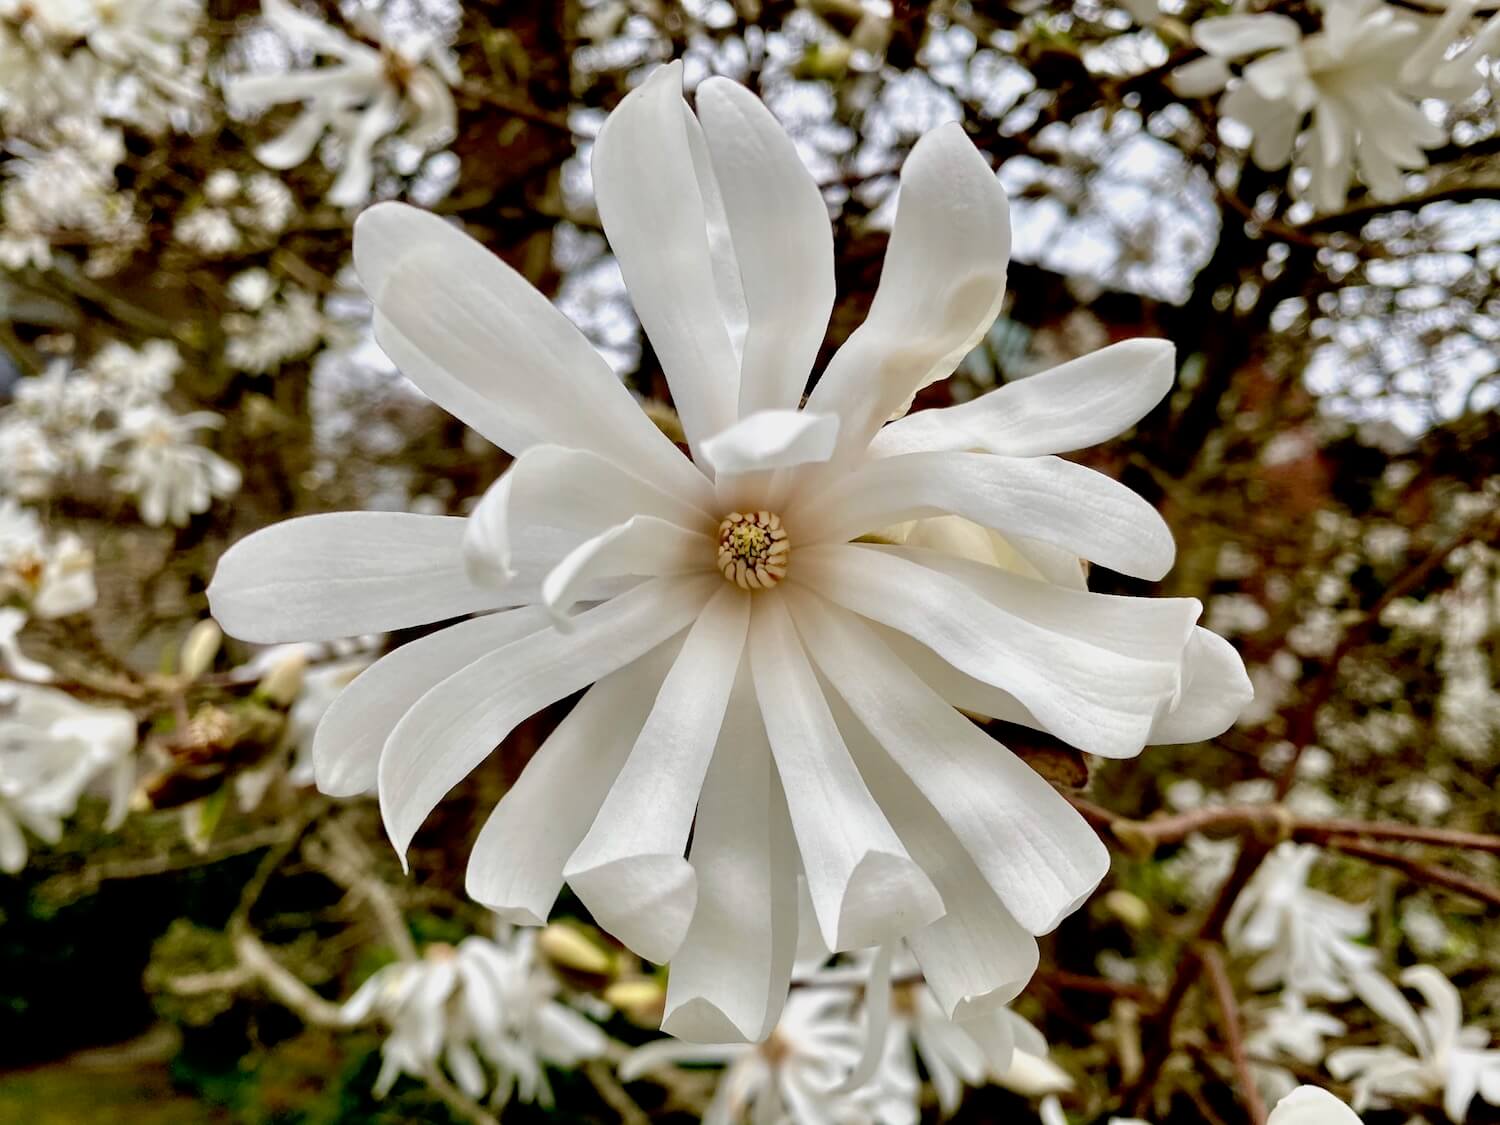 The optimistic Star Magnolia inspires energy with the 20 or so long narrow petals that reach out to the viewer. IN the middle is a tight grouping of pinkish pistols while the out of focus background hosts dozens more blooms amongst the brown branches providing important structure to the tree.